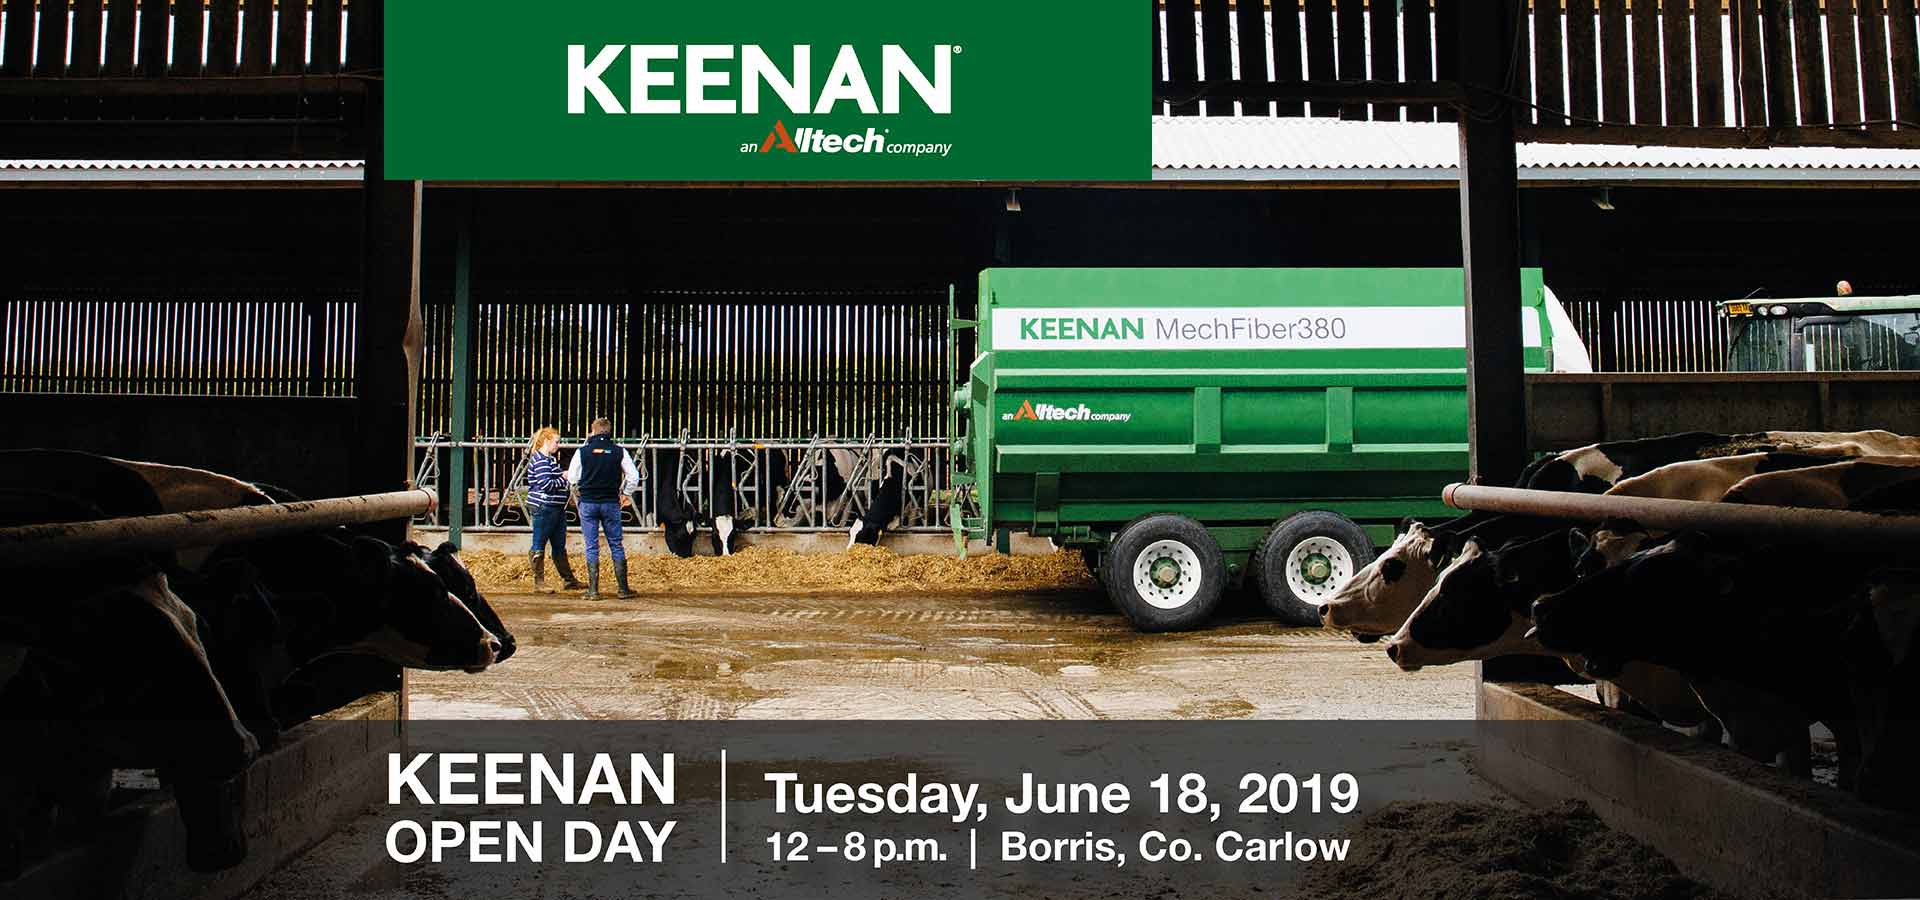 Keenan Open Day Event graphic